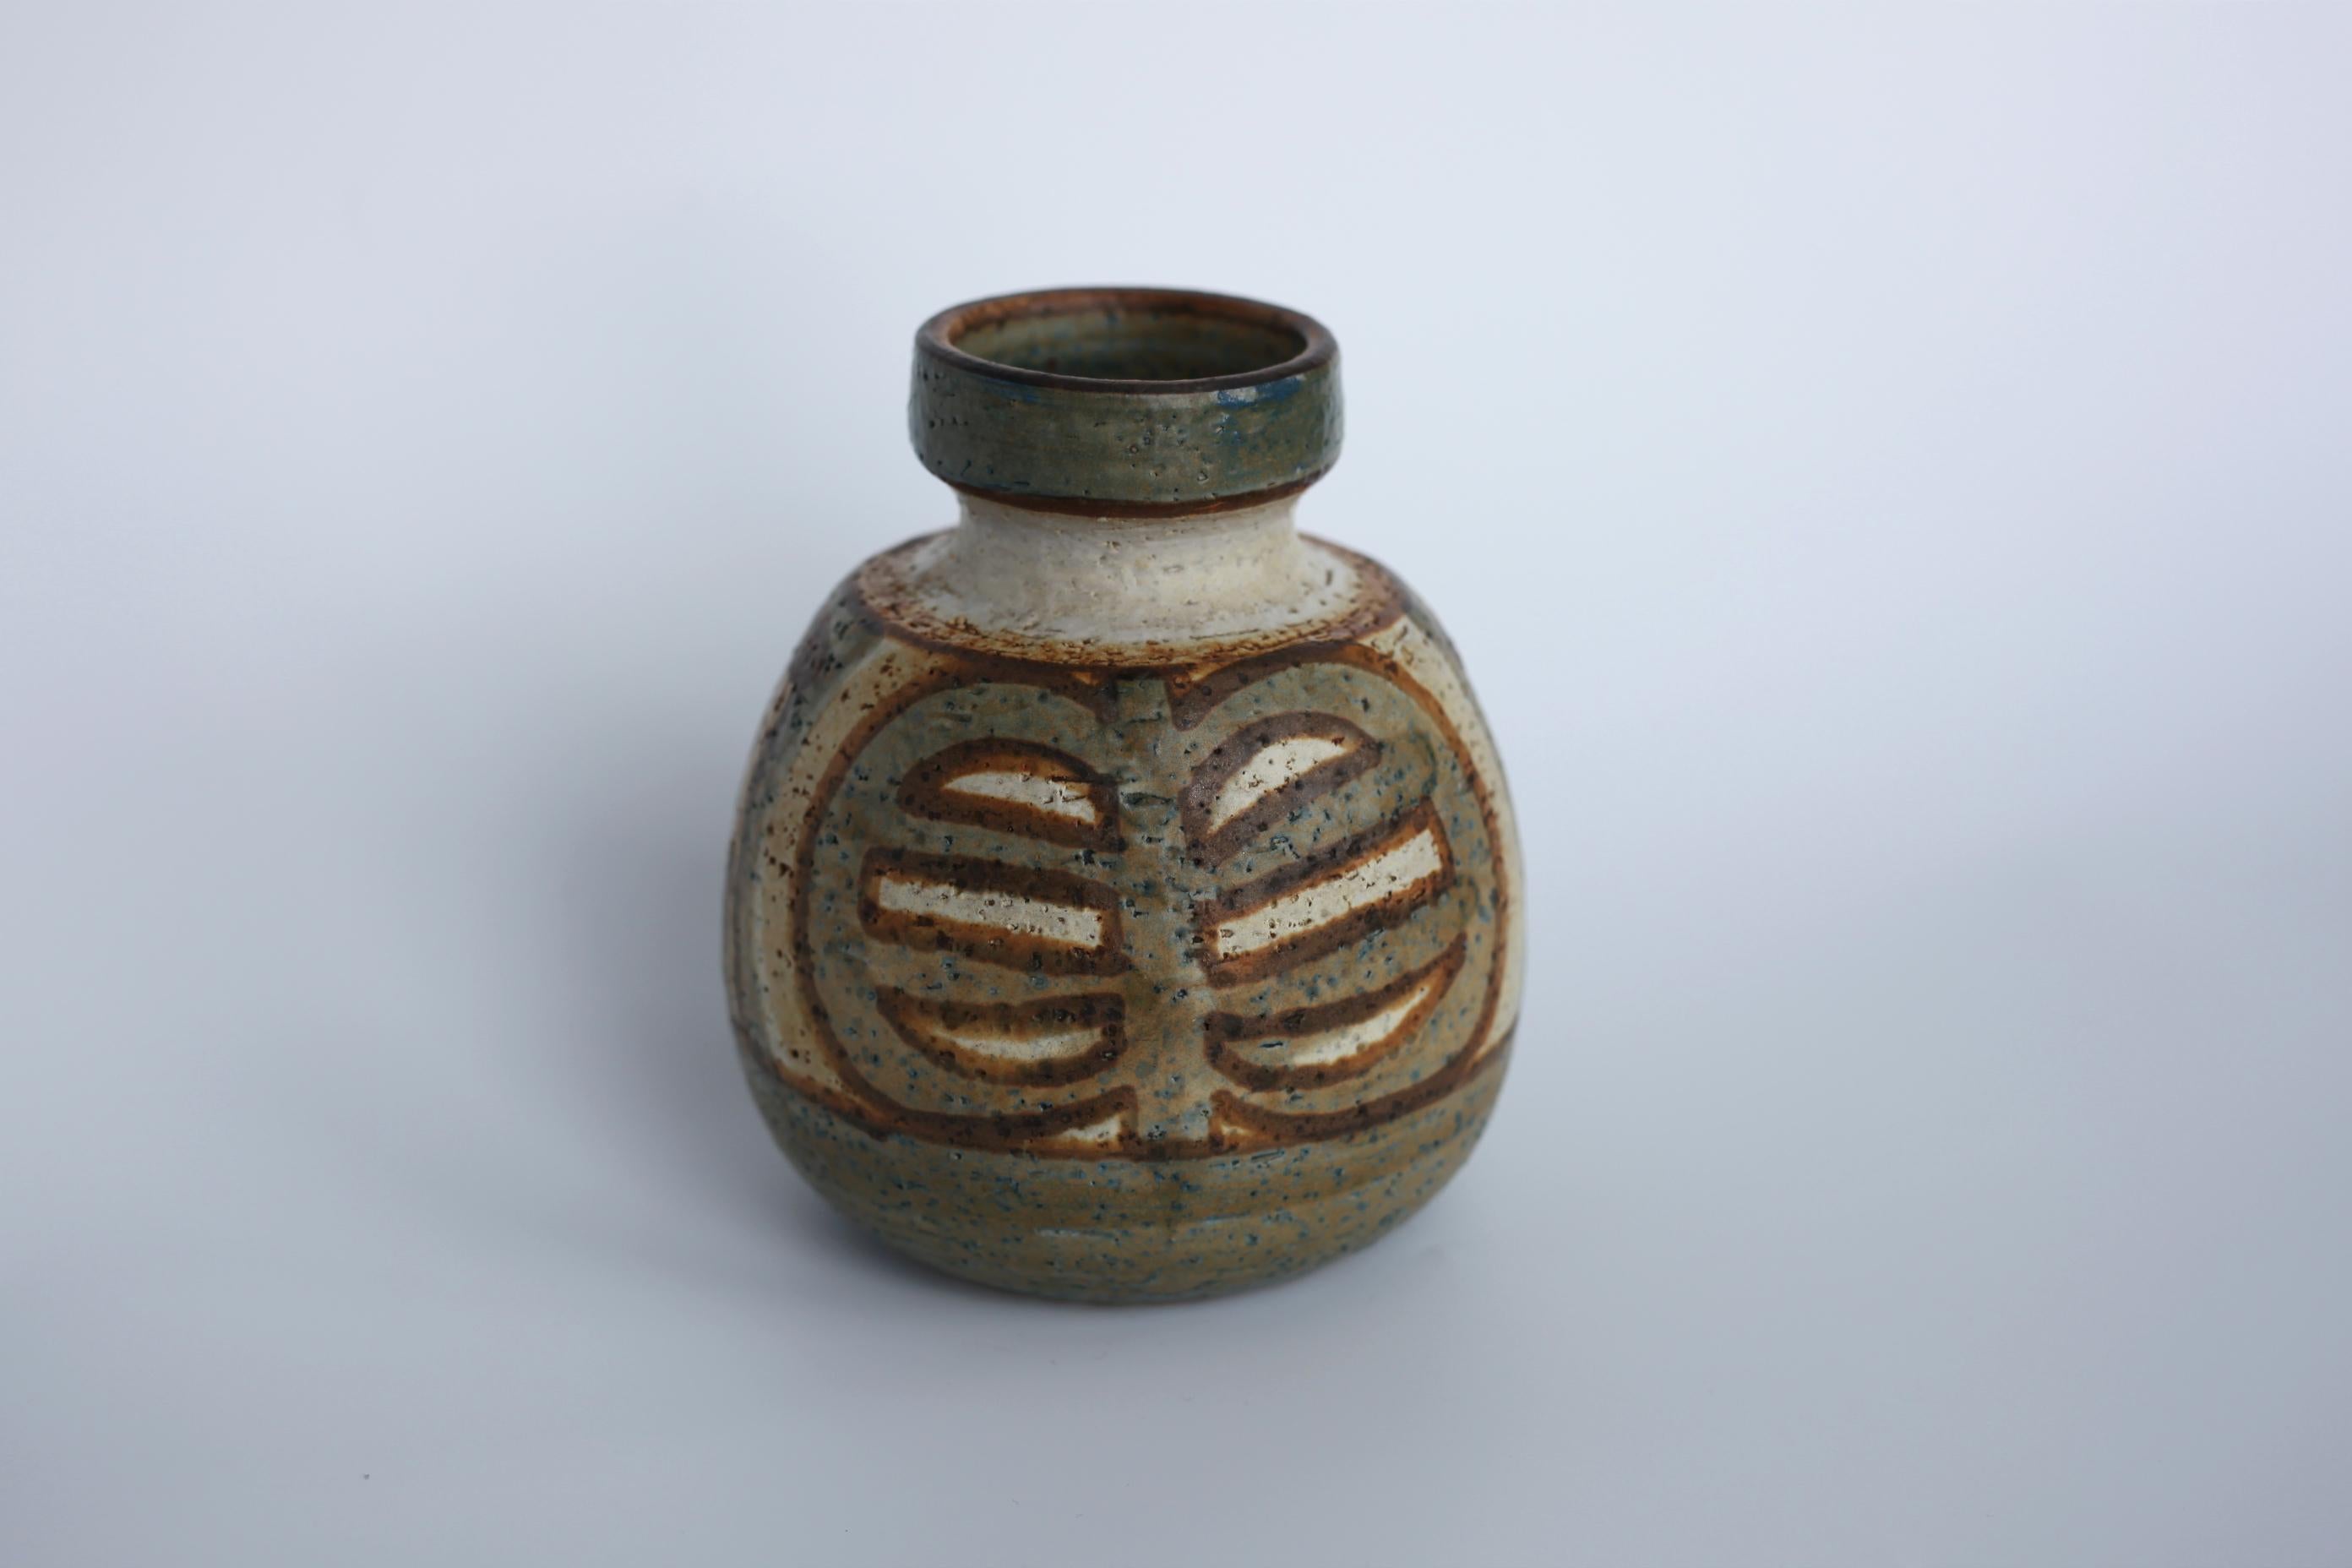 Vase made at the Scandinavian Søholm pottery on the Island of Bornholm by Noomi Backhausen


The island of Bornholm is the most Eastern point of Denmark and the Søholm pottery is one of the tree if not the most famous and well-known vase maker in